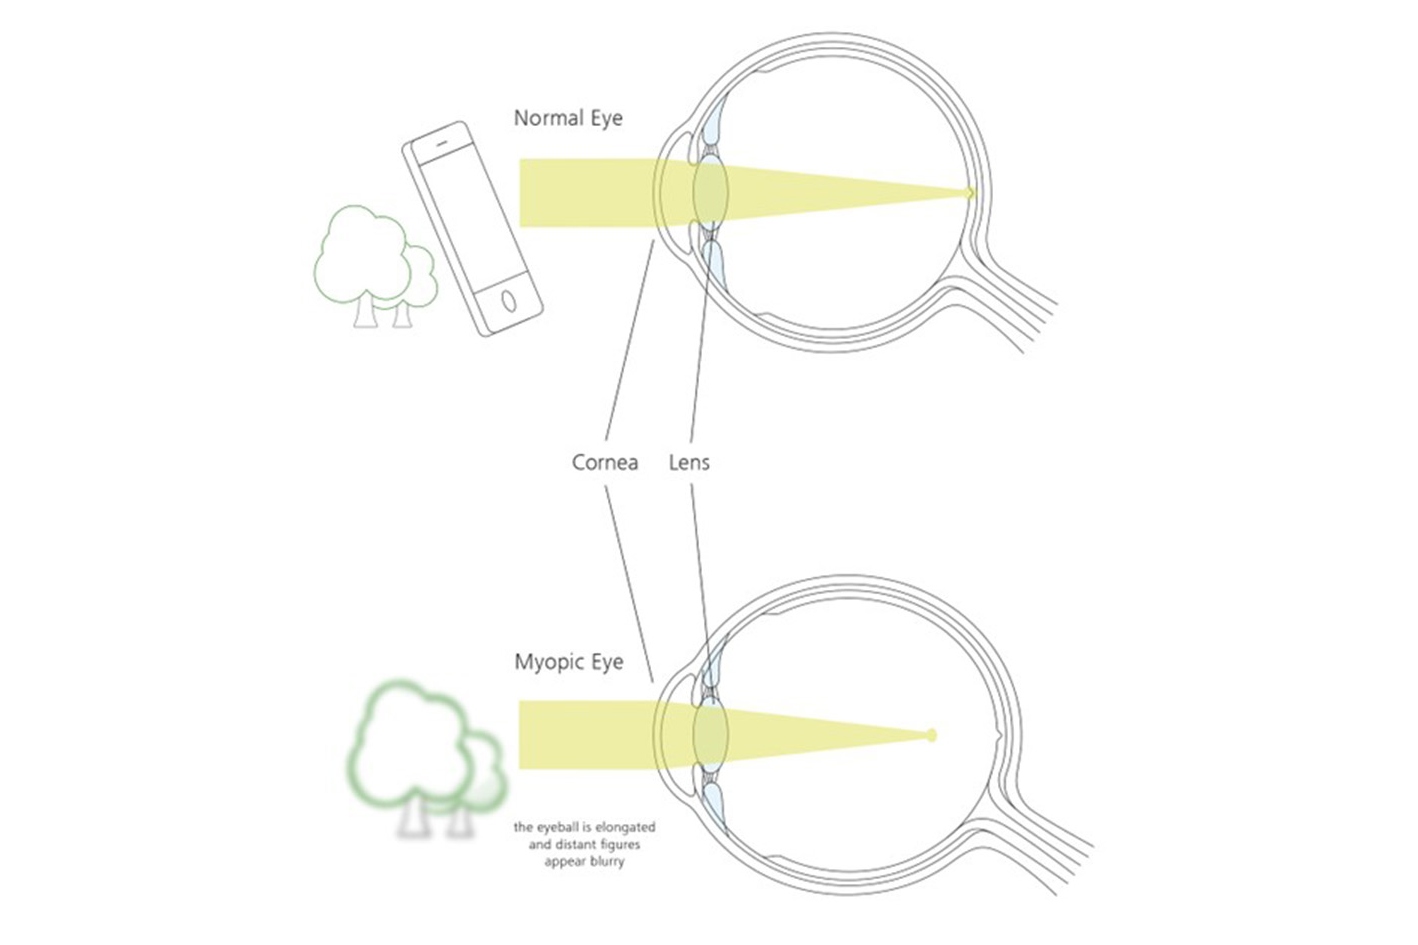 If the eyeball is elongated, light entering the eye reaches its point of focus in front of the retina.